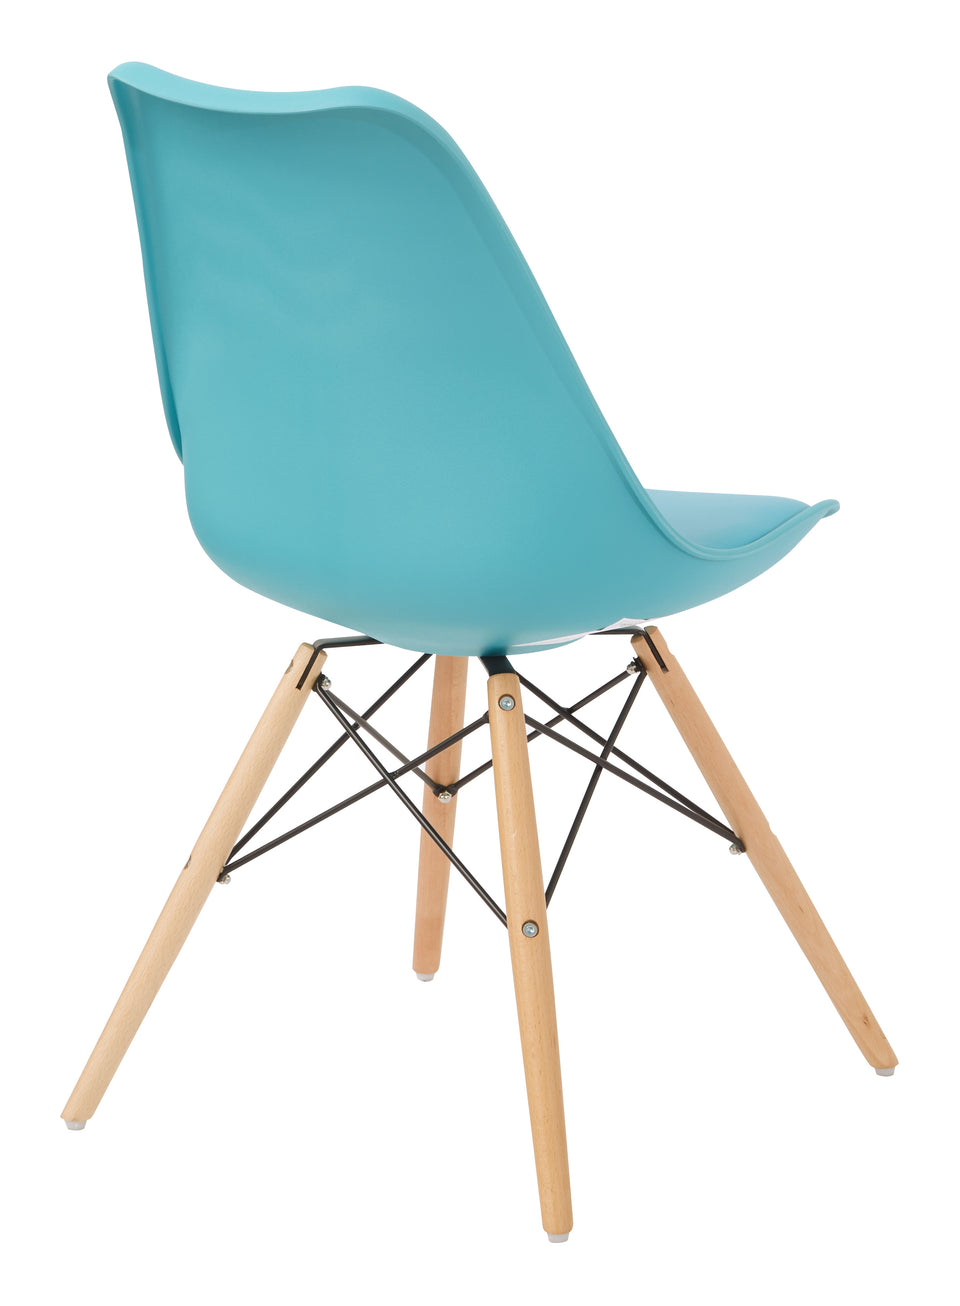 mid century modern aimes blue bucket chair with natural post legs scandinavian design inspired from decurban.com angle back view